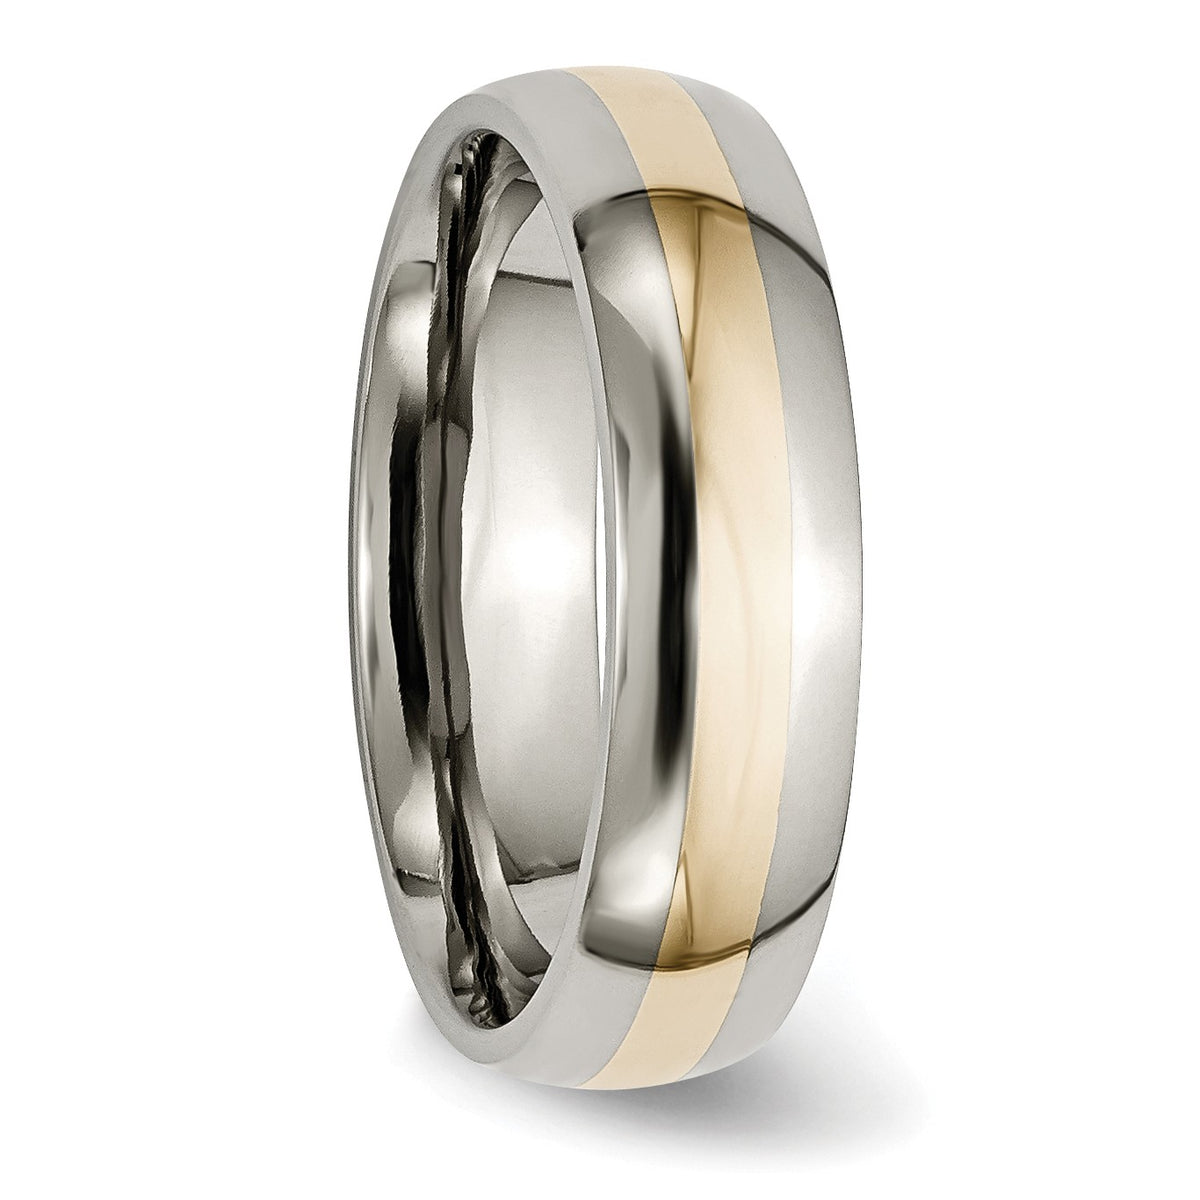 Alternate view of the Titanium and 14K Gold Inlay, 6mm Unisex Band by The Black Bow Jewelry Co.